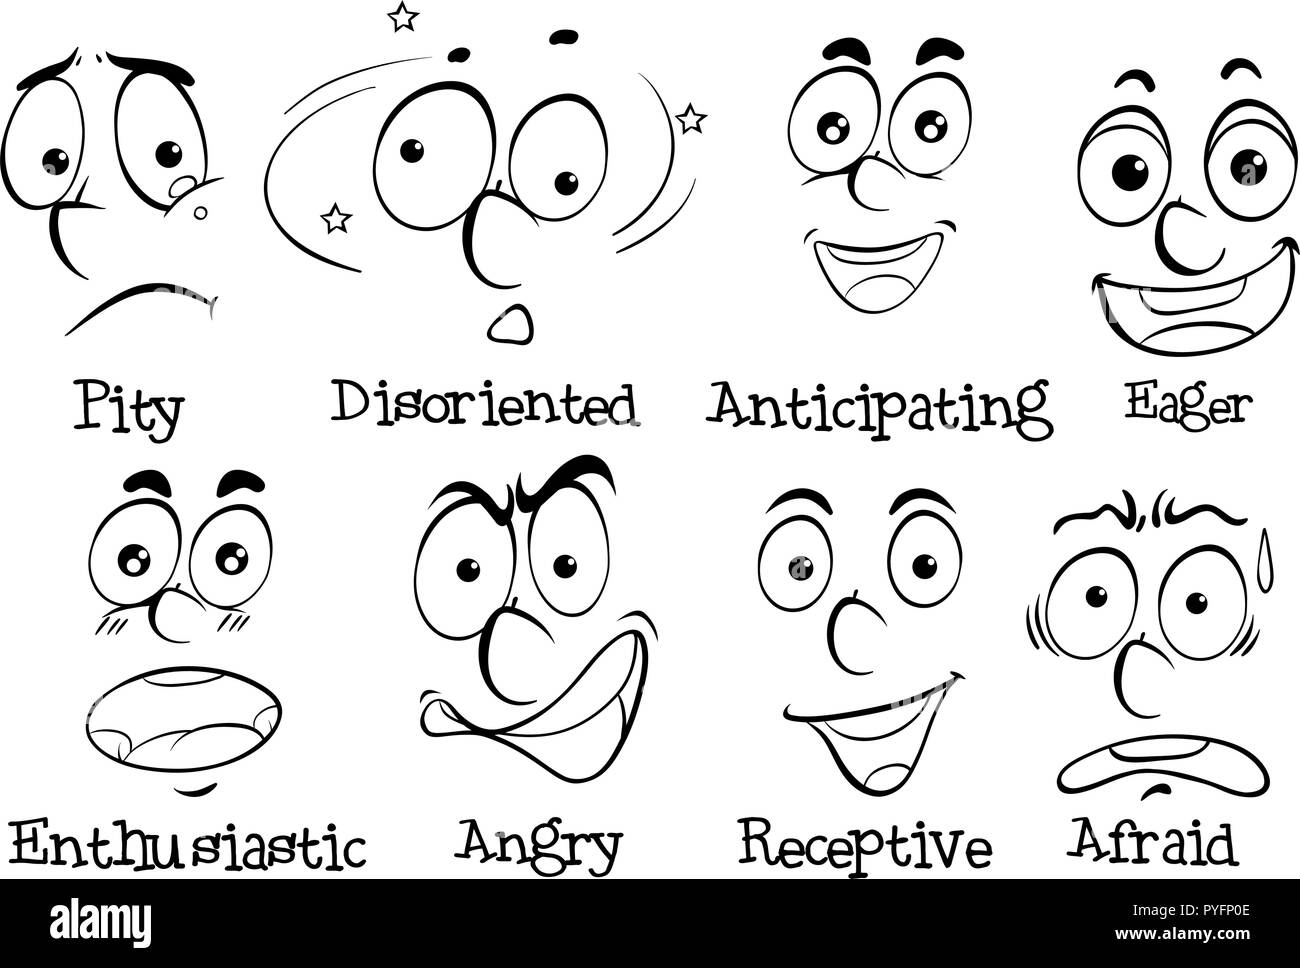 Diffferent facial expressions with words illustration Stock Vector